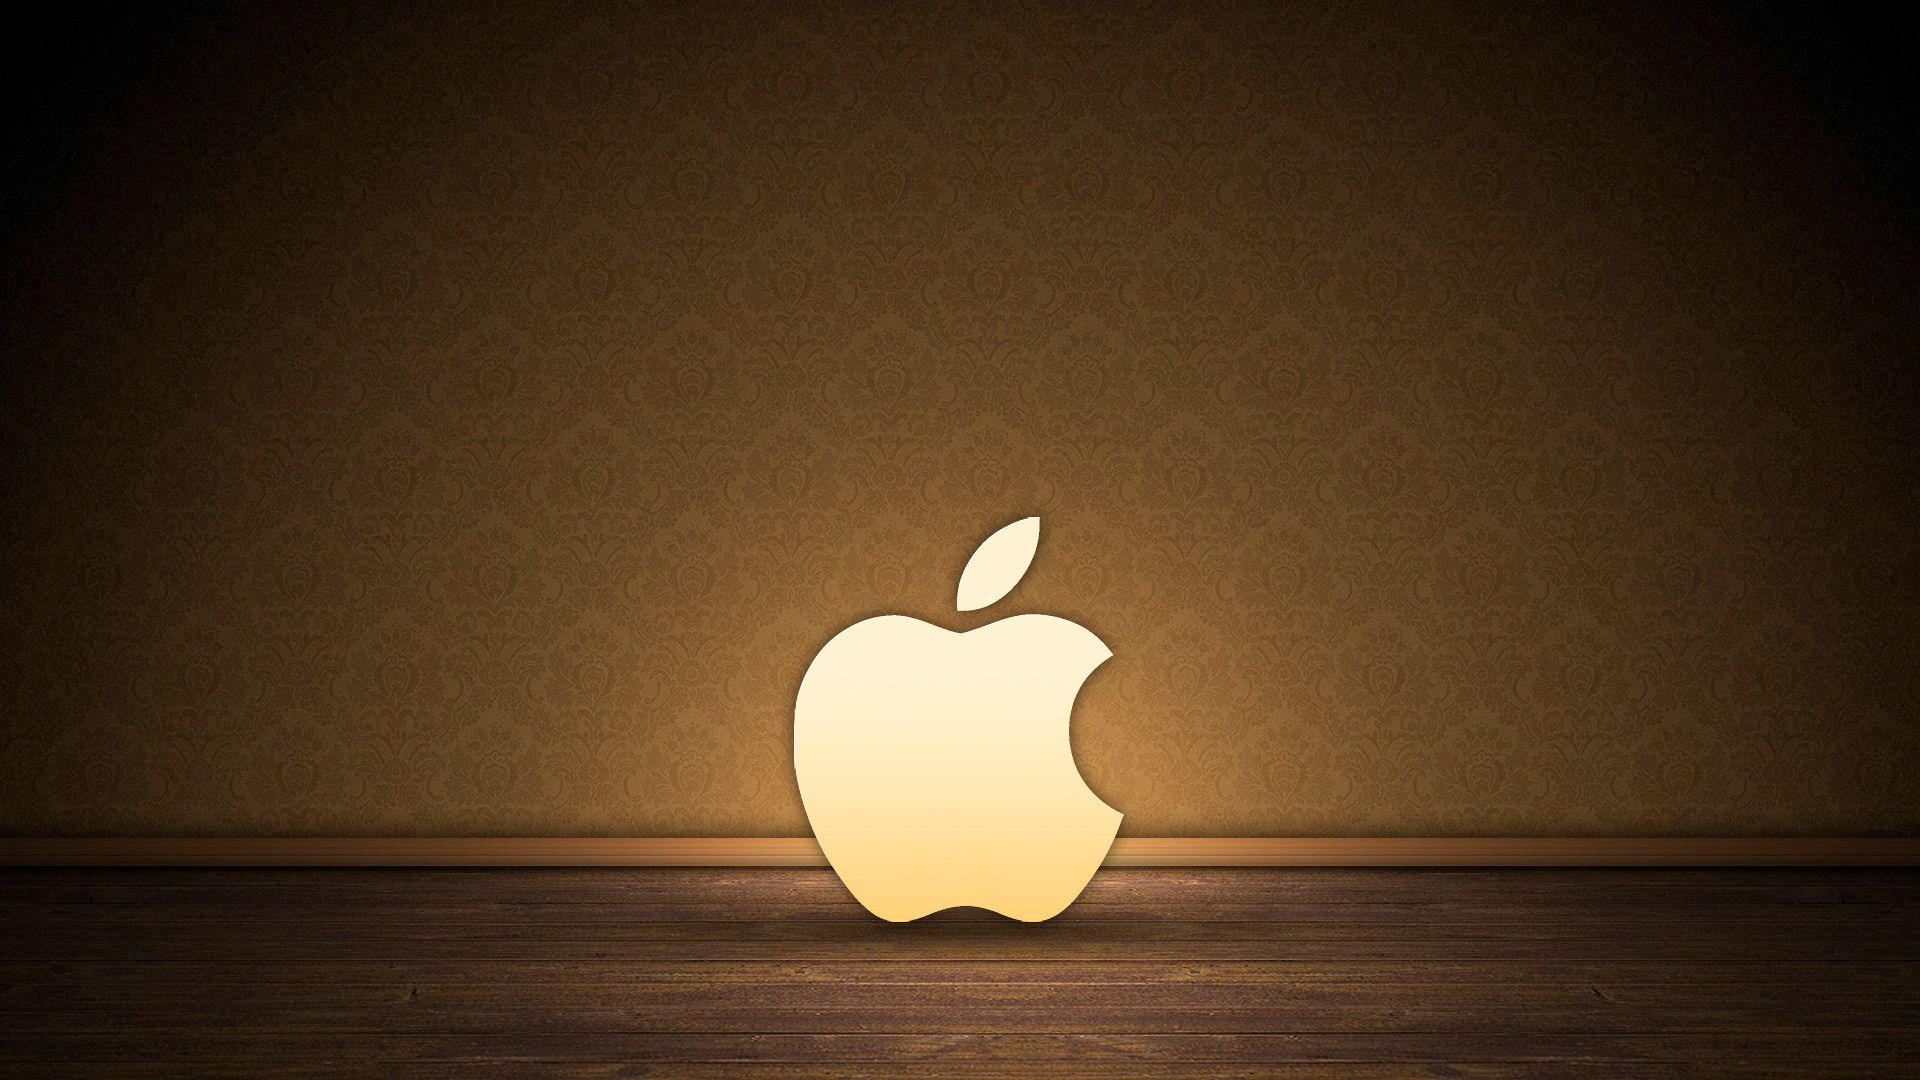 Background Apples Iphone